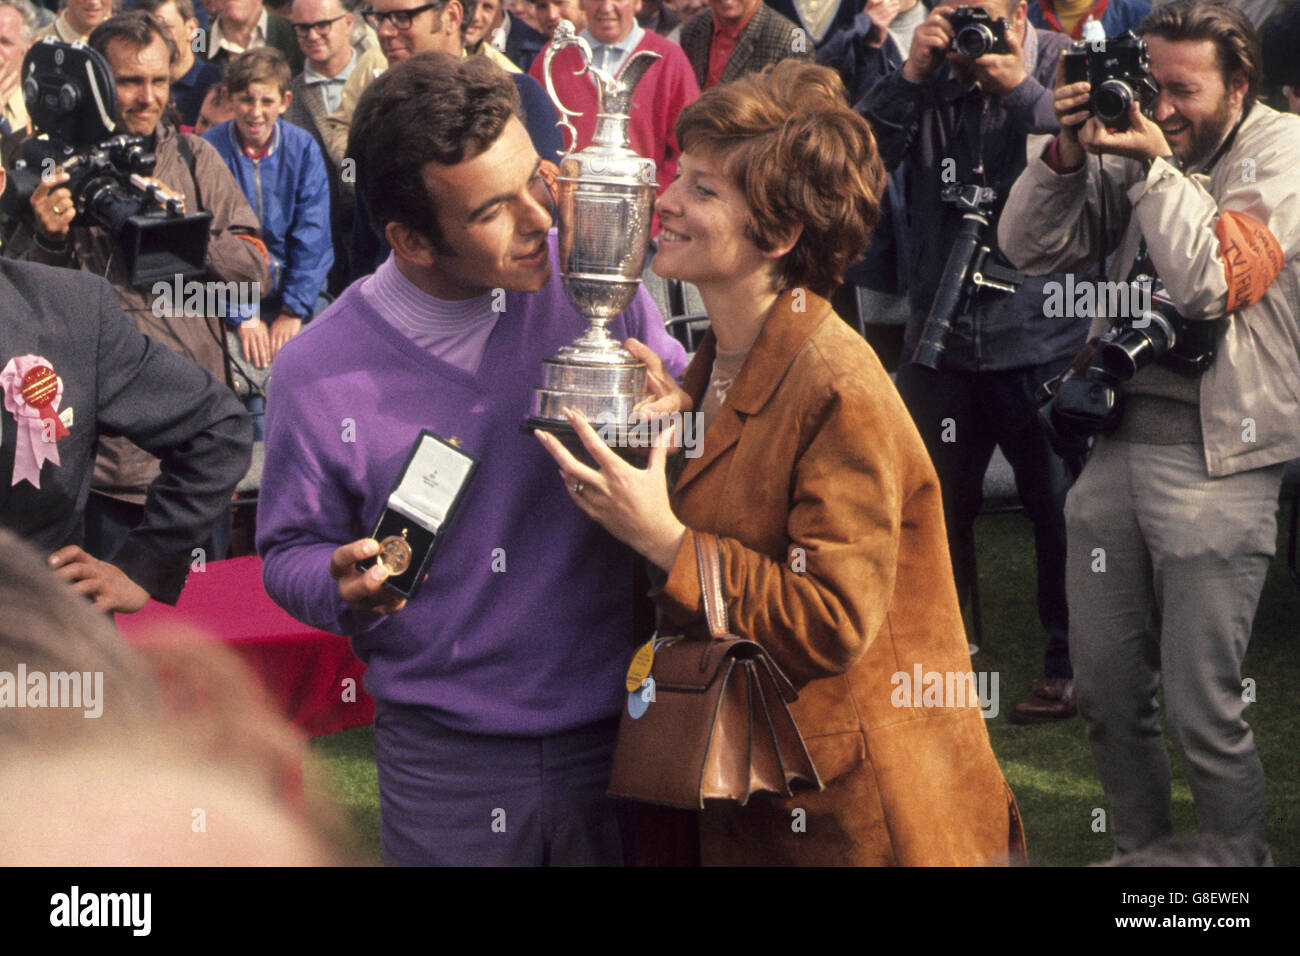 Englishman Tony Jacklin celebrates with his wife after winning the 1969 Open Championship at Royal Lytham and St Annes Golf Club. Stock Photo